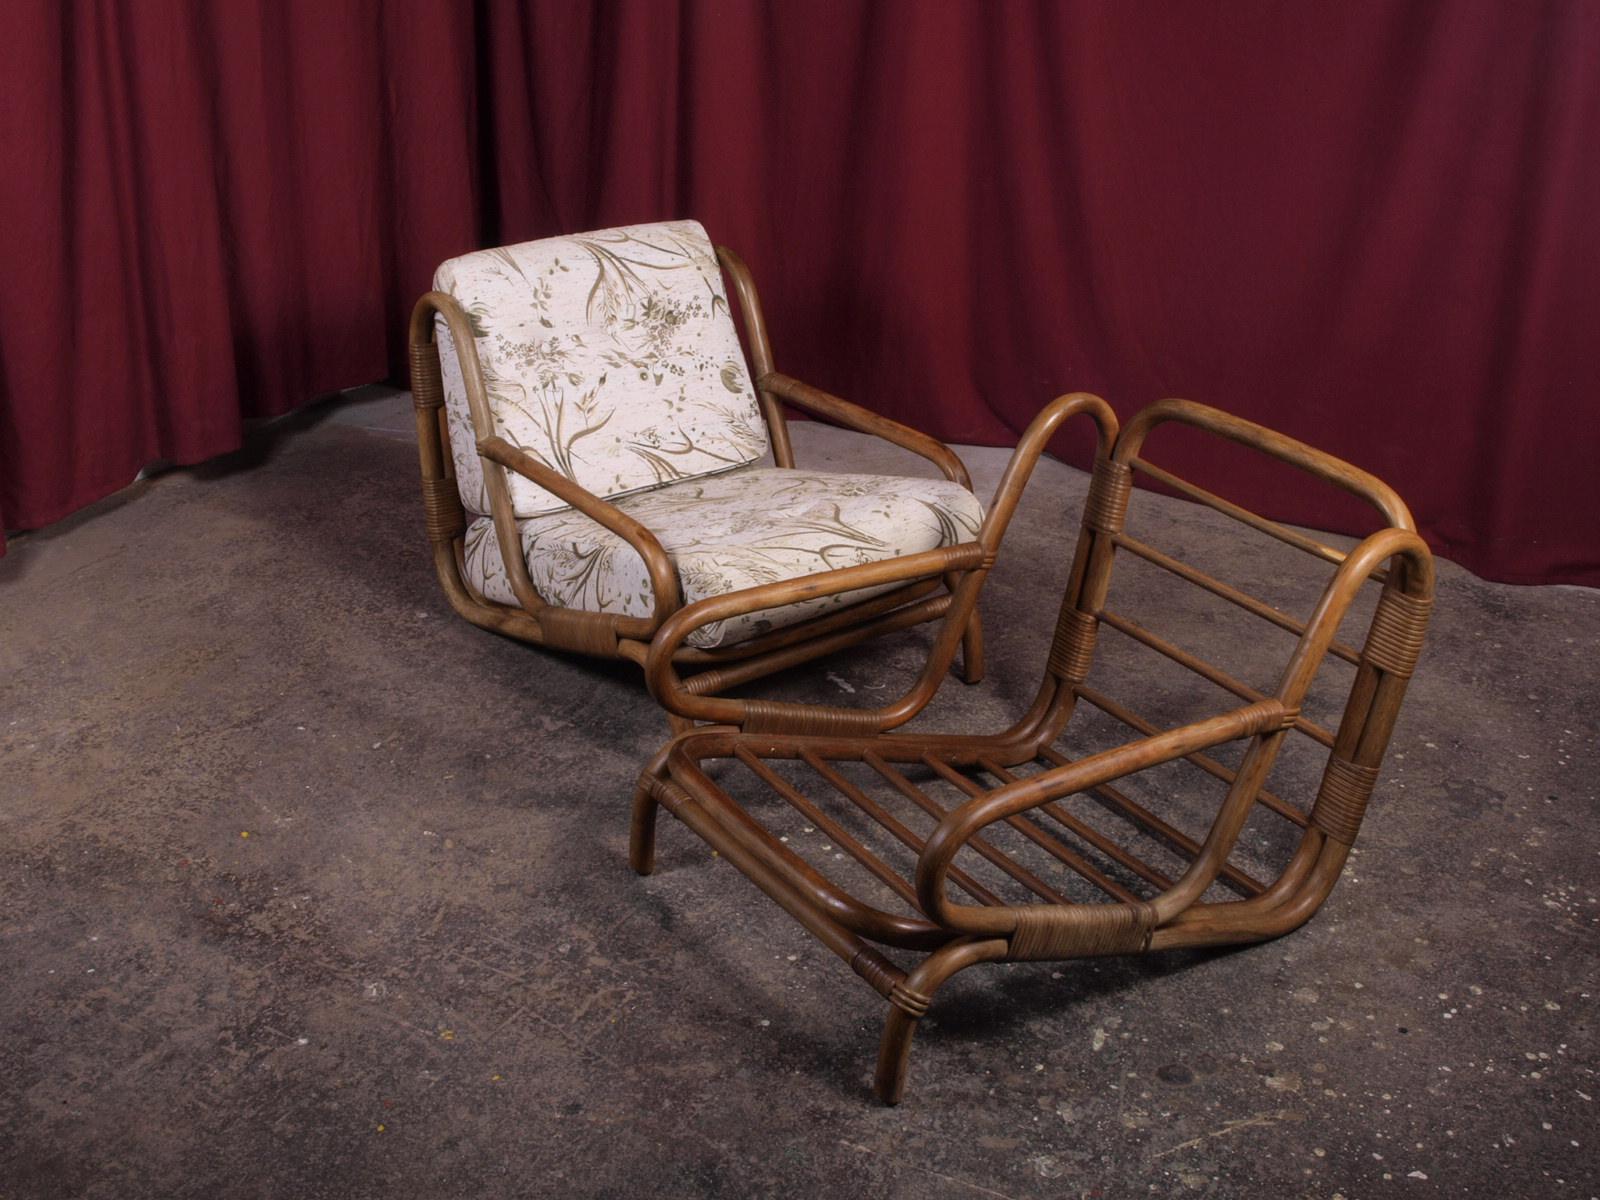 Rare Bamboo Vintage Danish Lounge Chairs, set of 2 For Sale 4